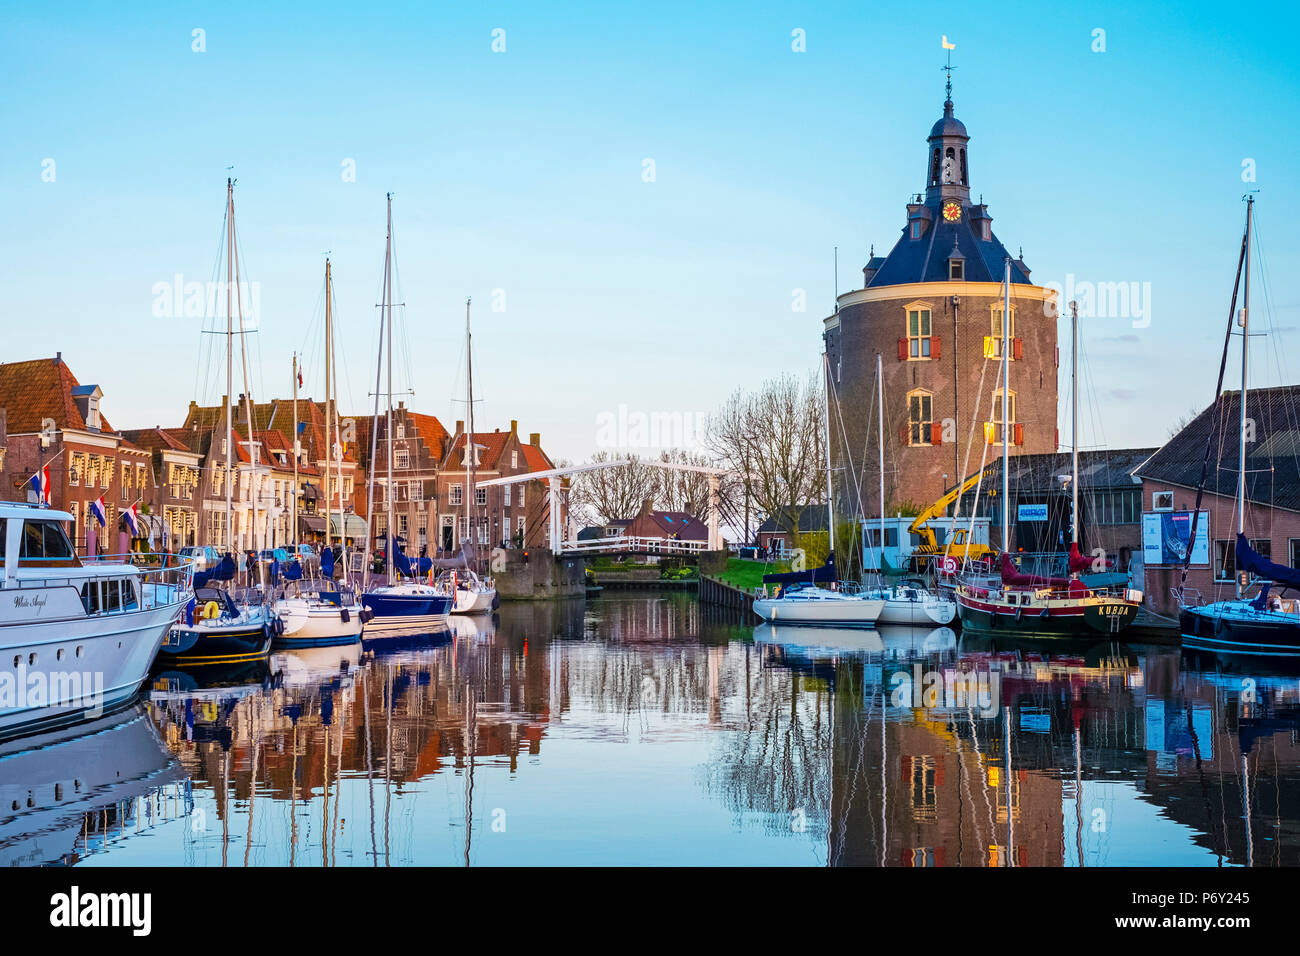 Netherlands, North Holland, Enkhuizen. Drommedaris tower, historic former city gate at the entrance to Oude Haven (Old Harbor). Stock Photo